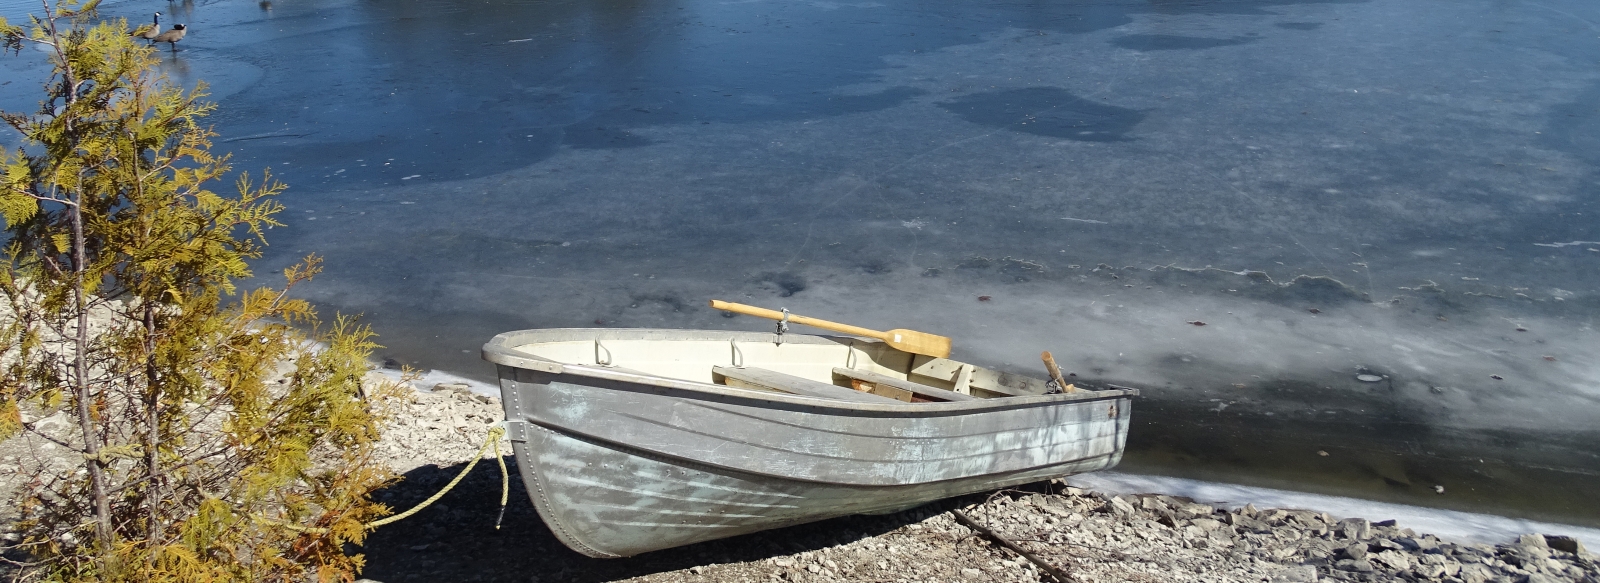 Boat on the shore of a thawing just barely icy lake